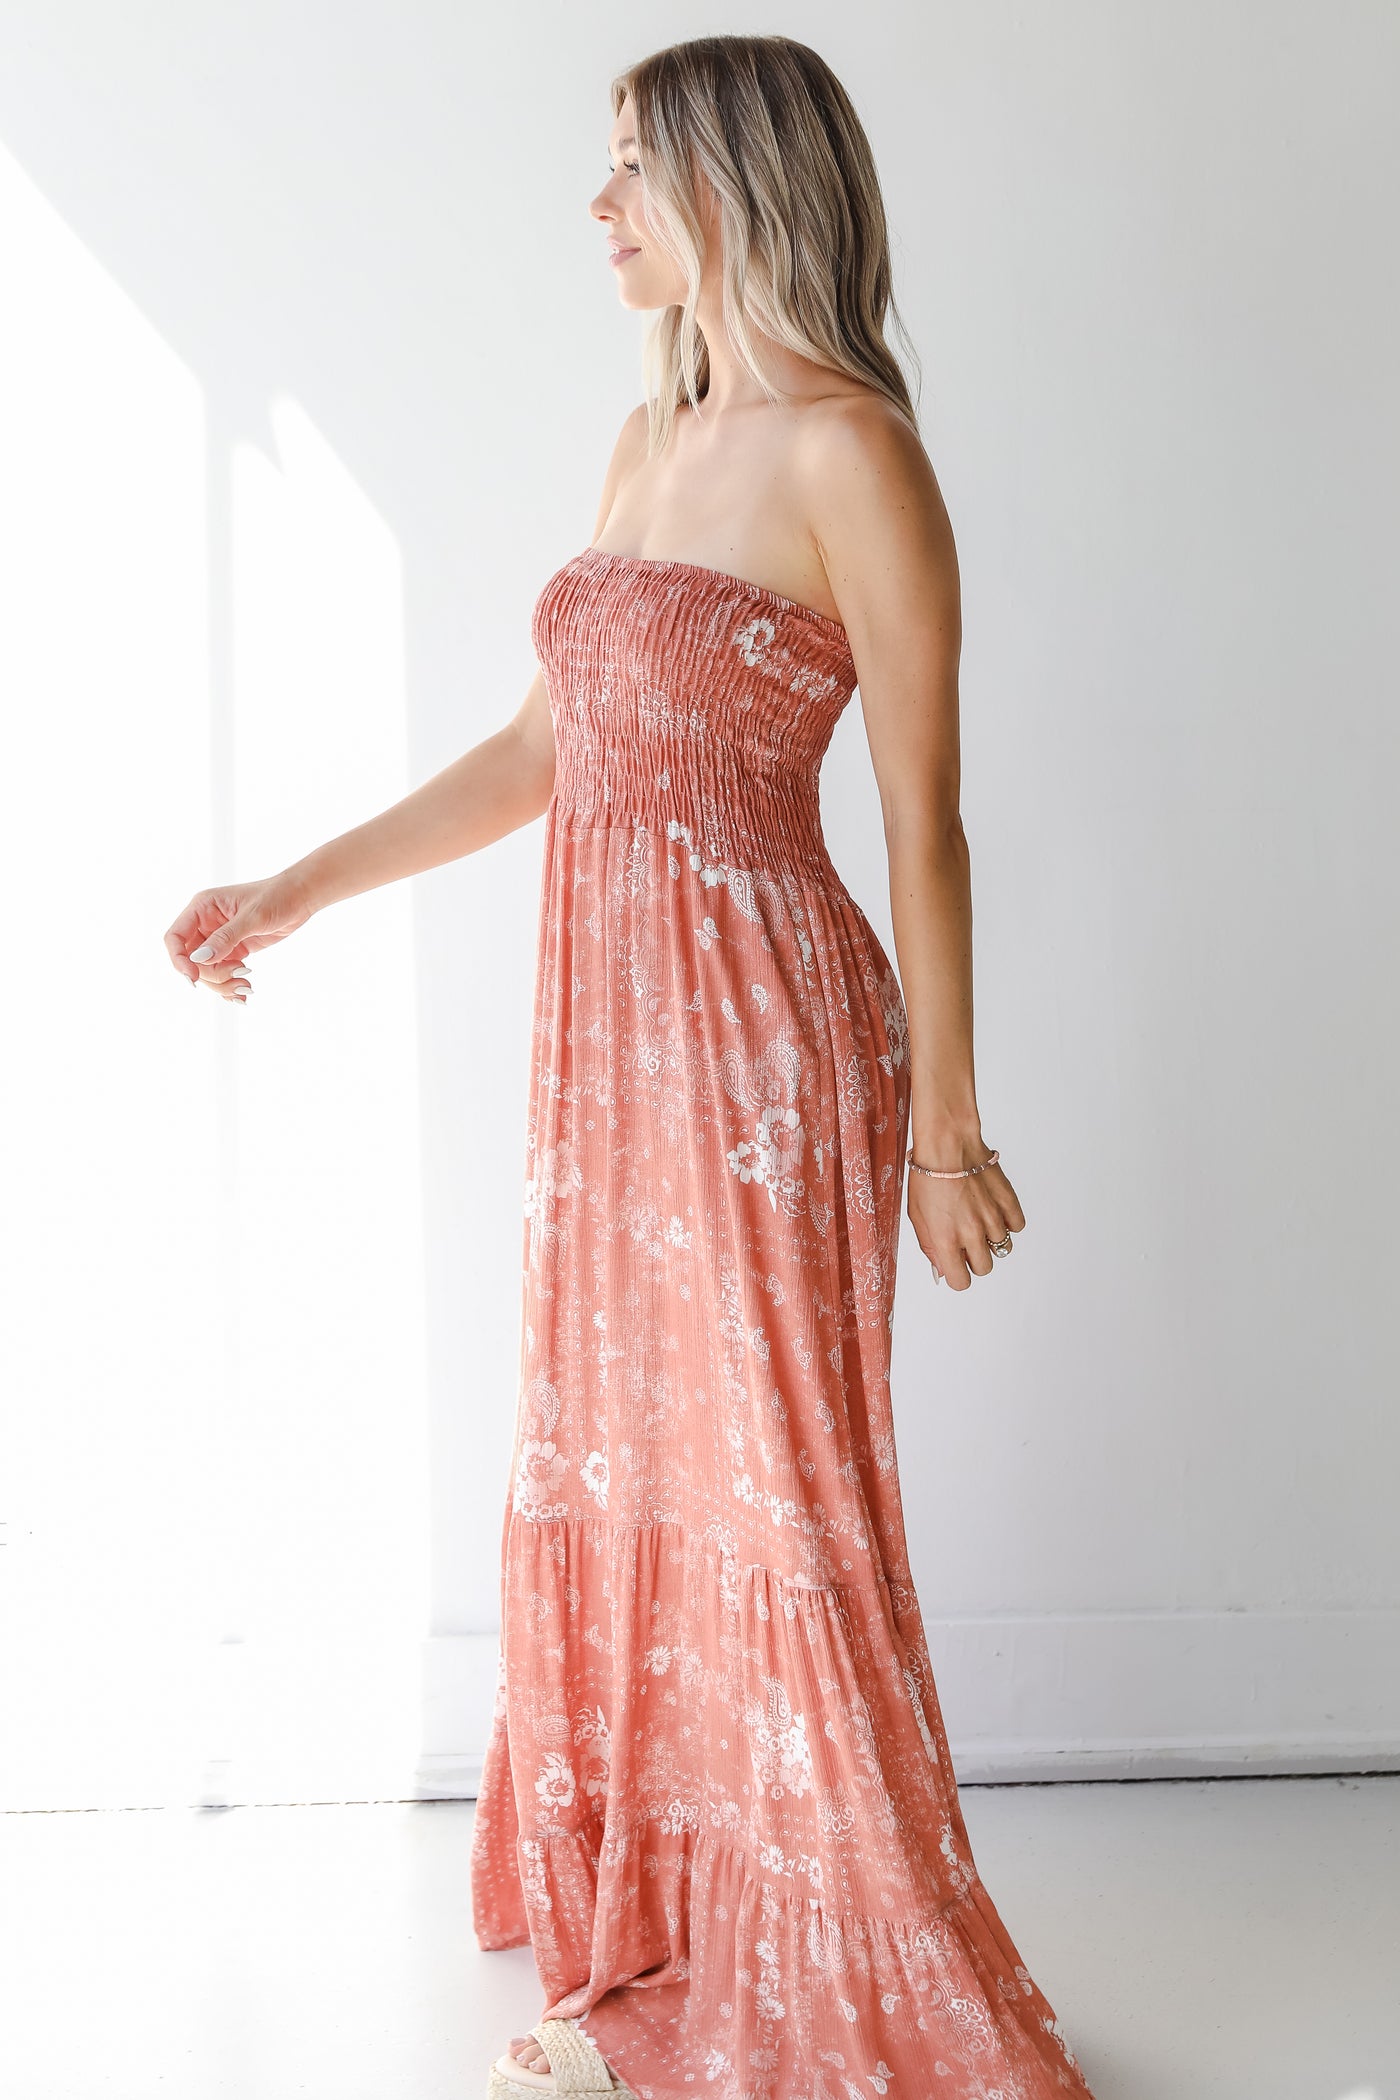 Strapless Maxi Dress side view